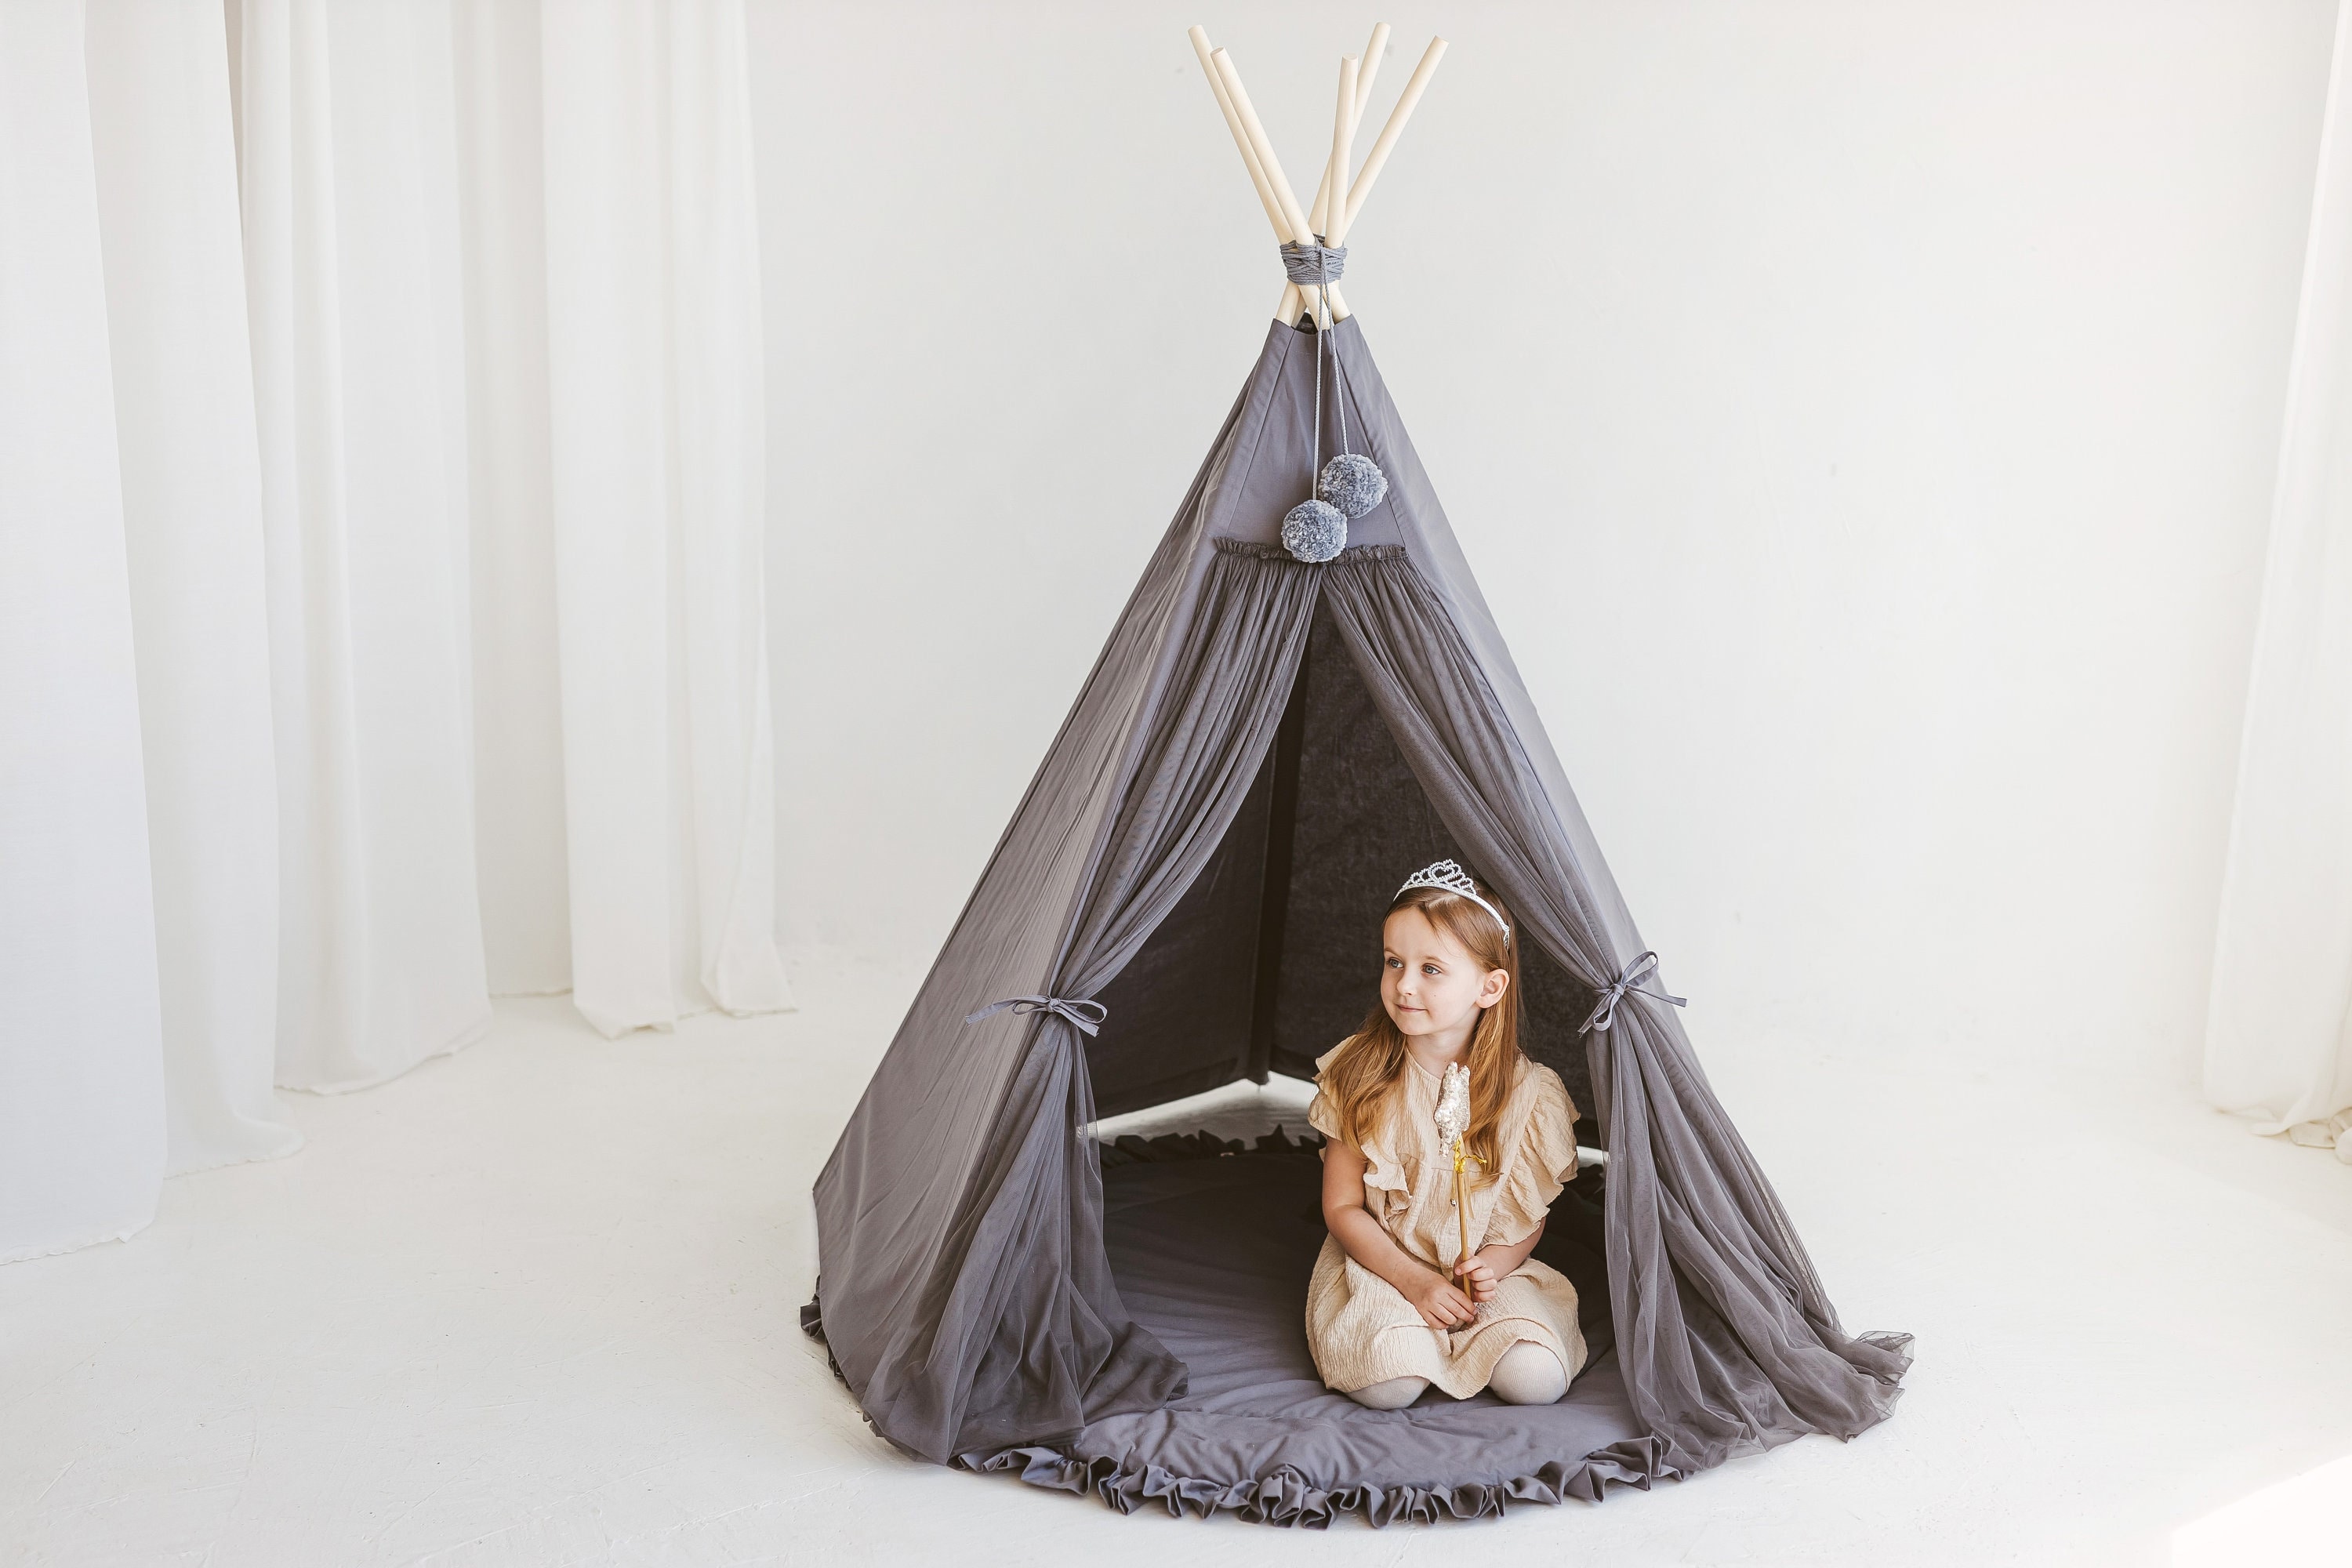 Kids Teepee, Teepees for Girls, Toddler Tent, Tipi Play Tent, Tipi Enfant,  Tipi Zelt Kidner, Teepees for Kids, Indian Teepee Tent, Pom Pom 